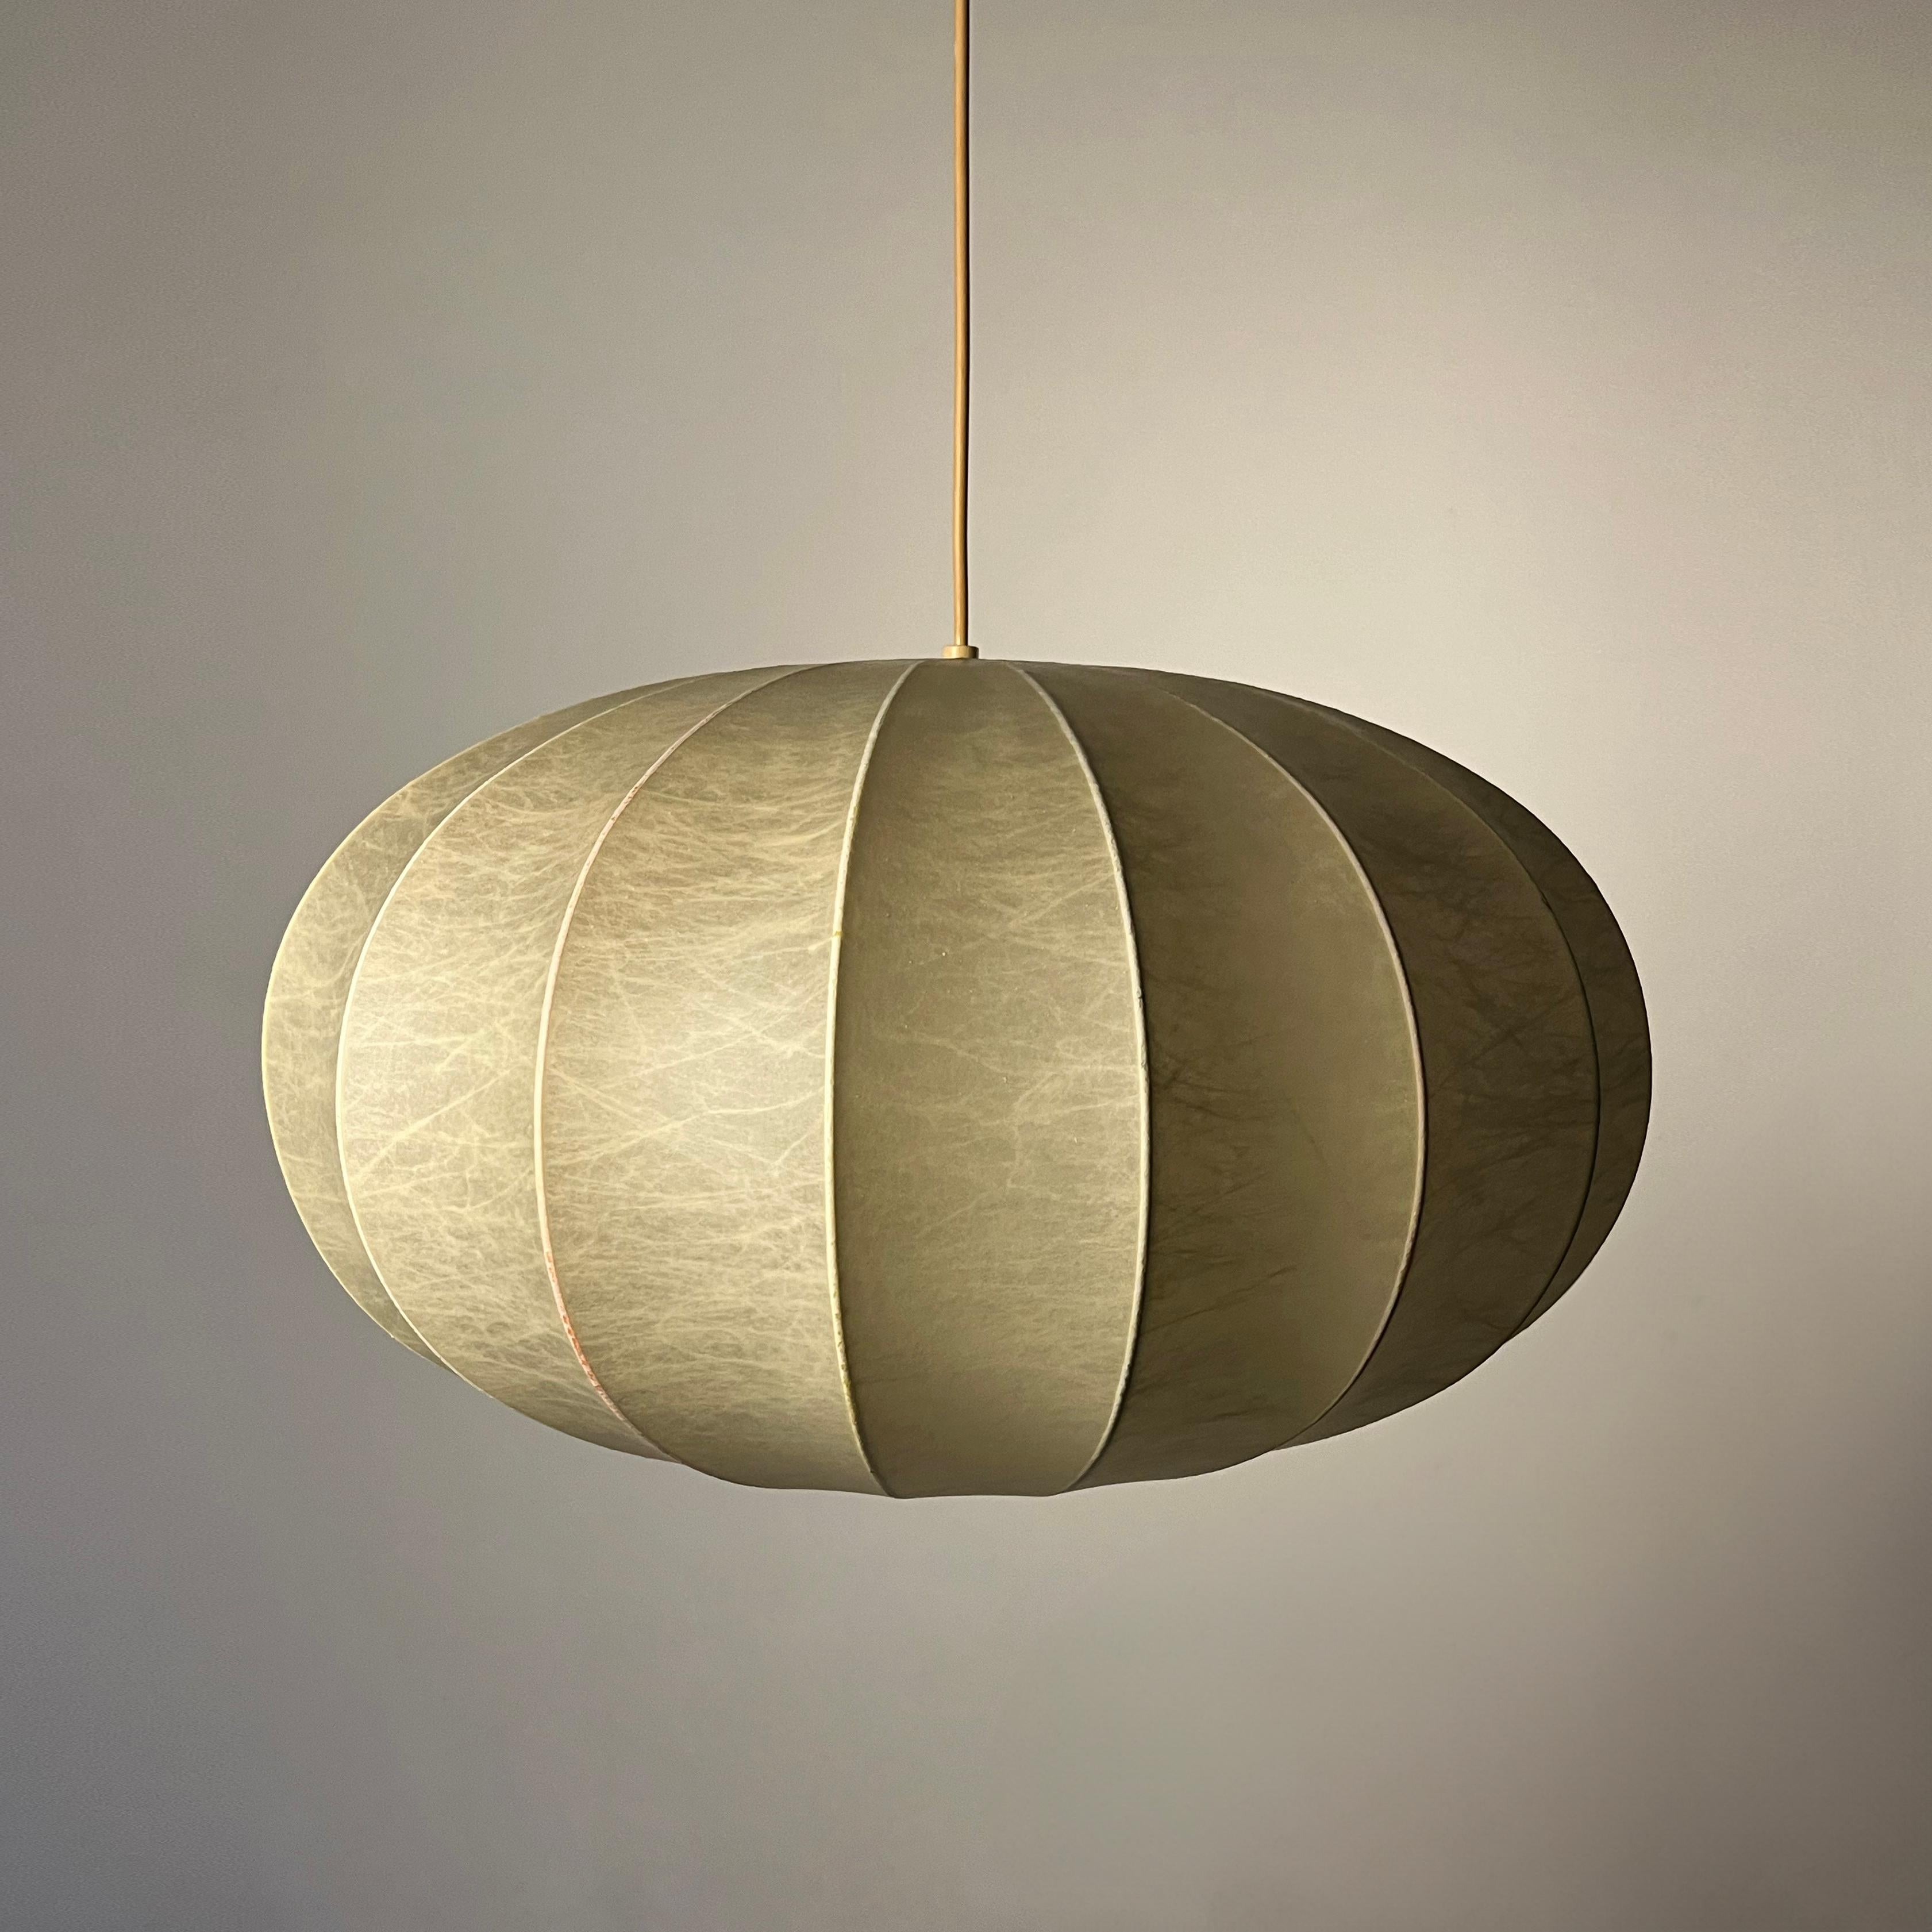 21.6 Inches Space Age Cocoon Pendant Lamp by Friedel Wauer for Goldkant Leuchten 2